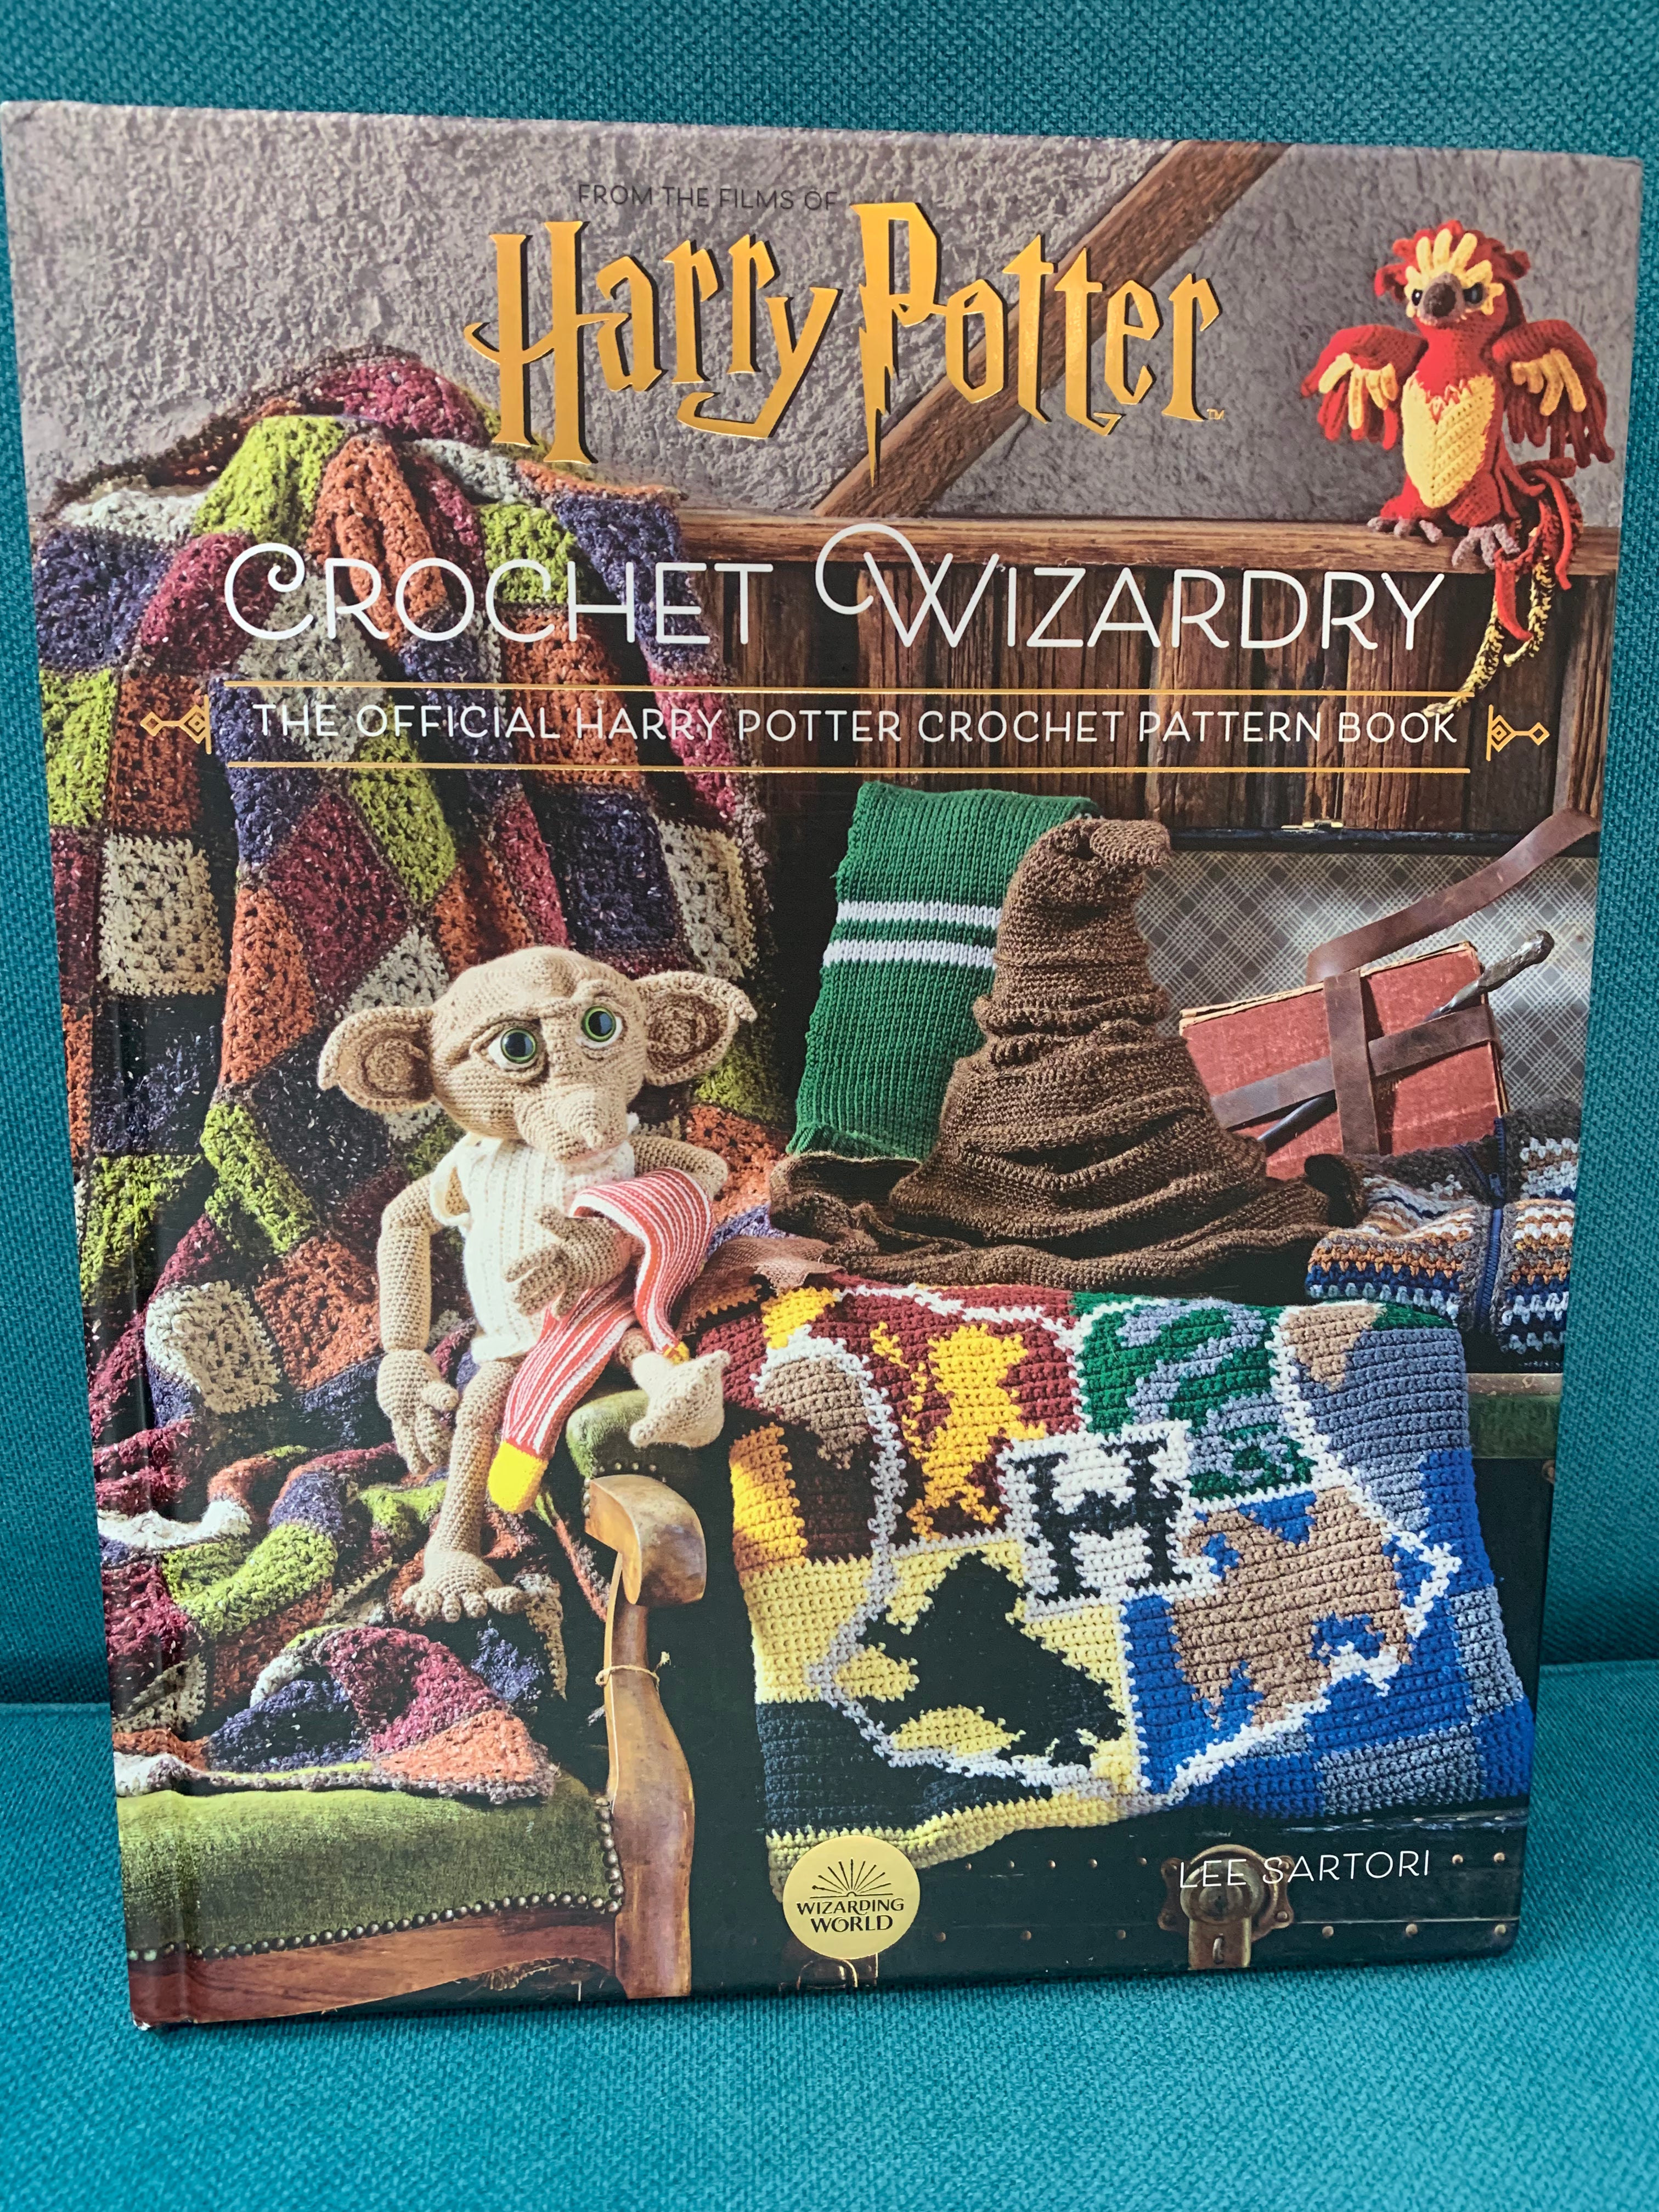 Reply to @laziesloth What's included in the Harry Pottter Crochet